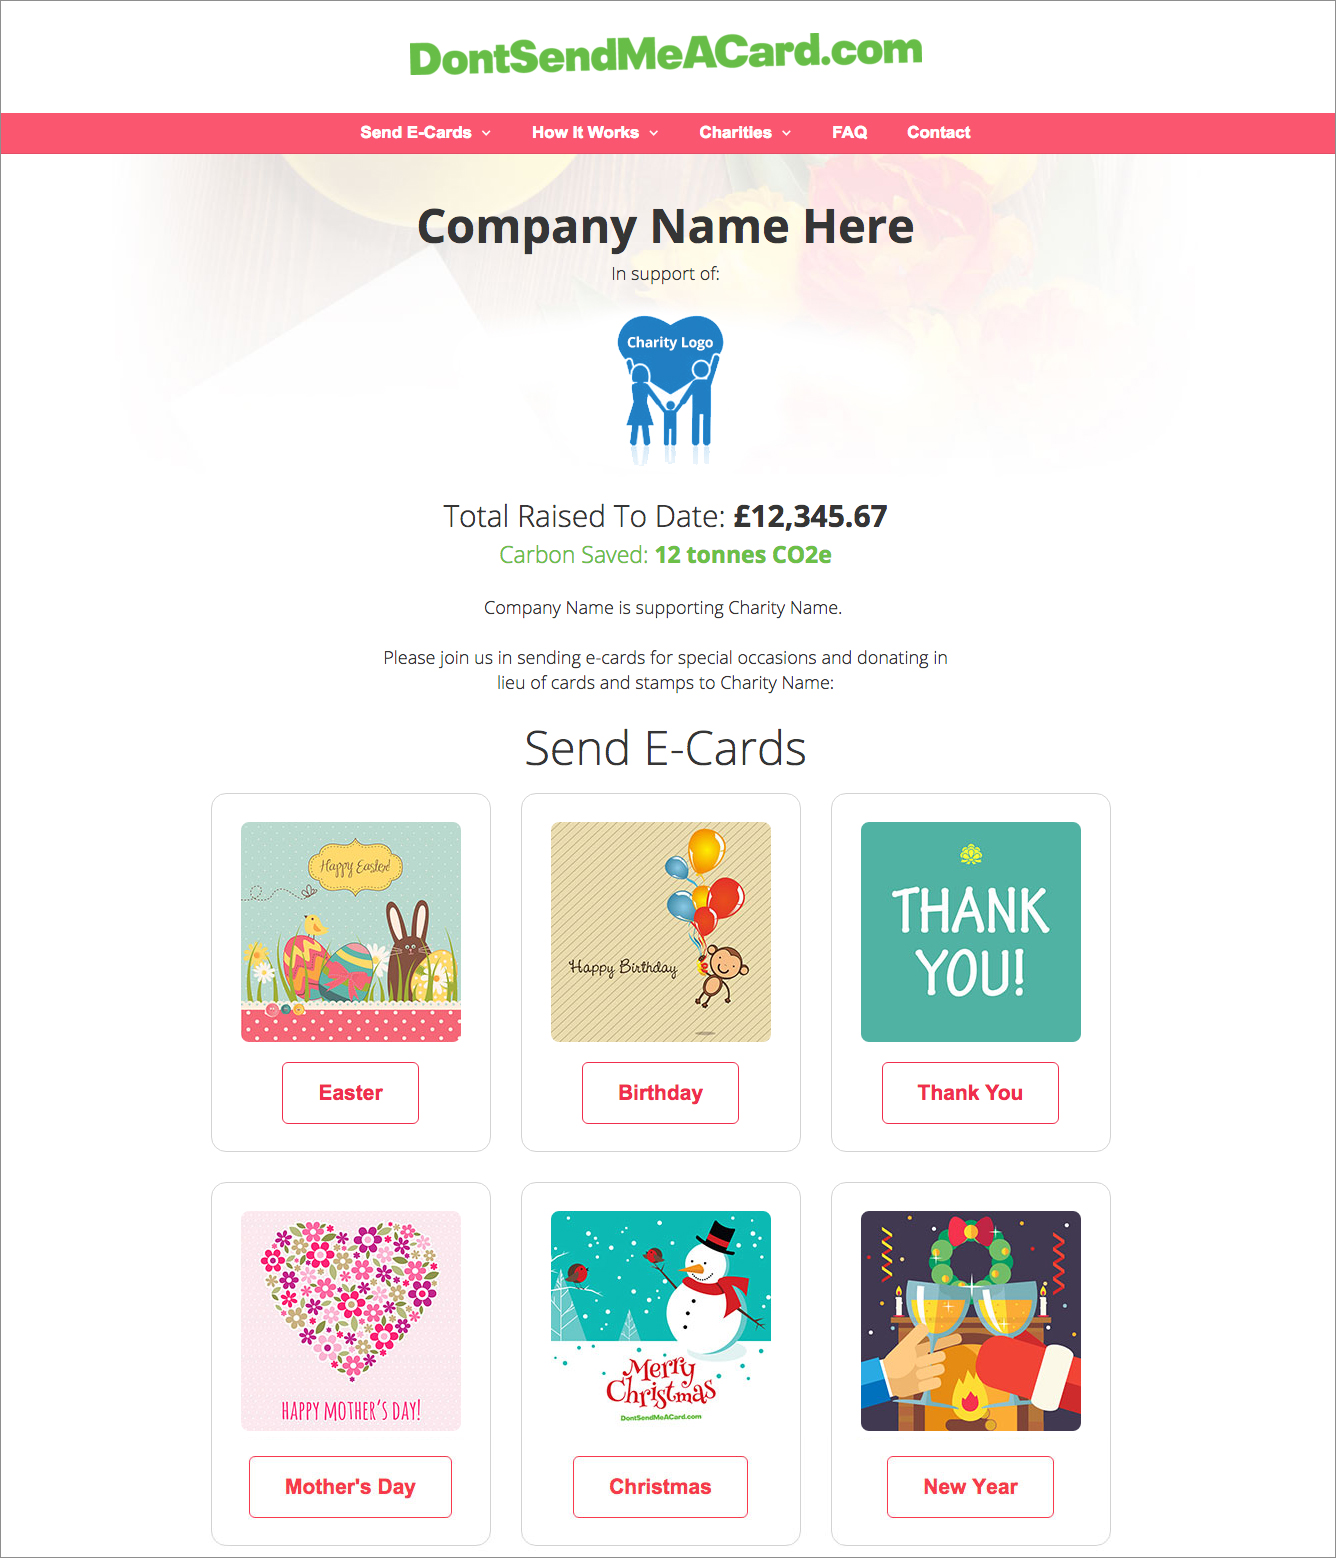 Example company landing page